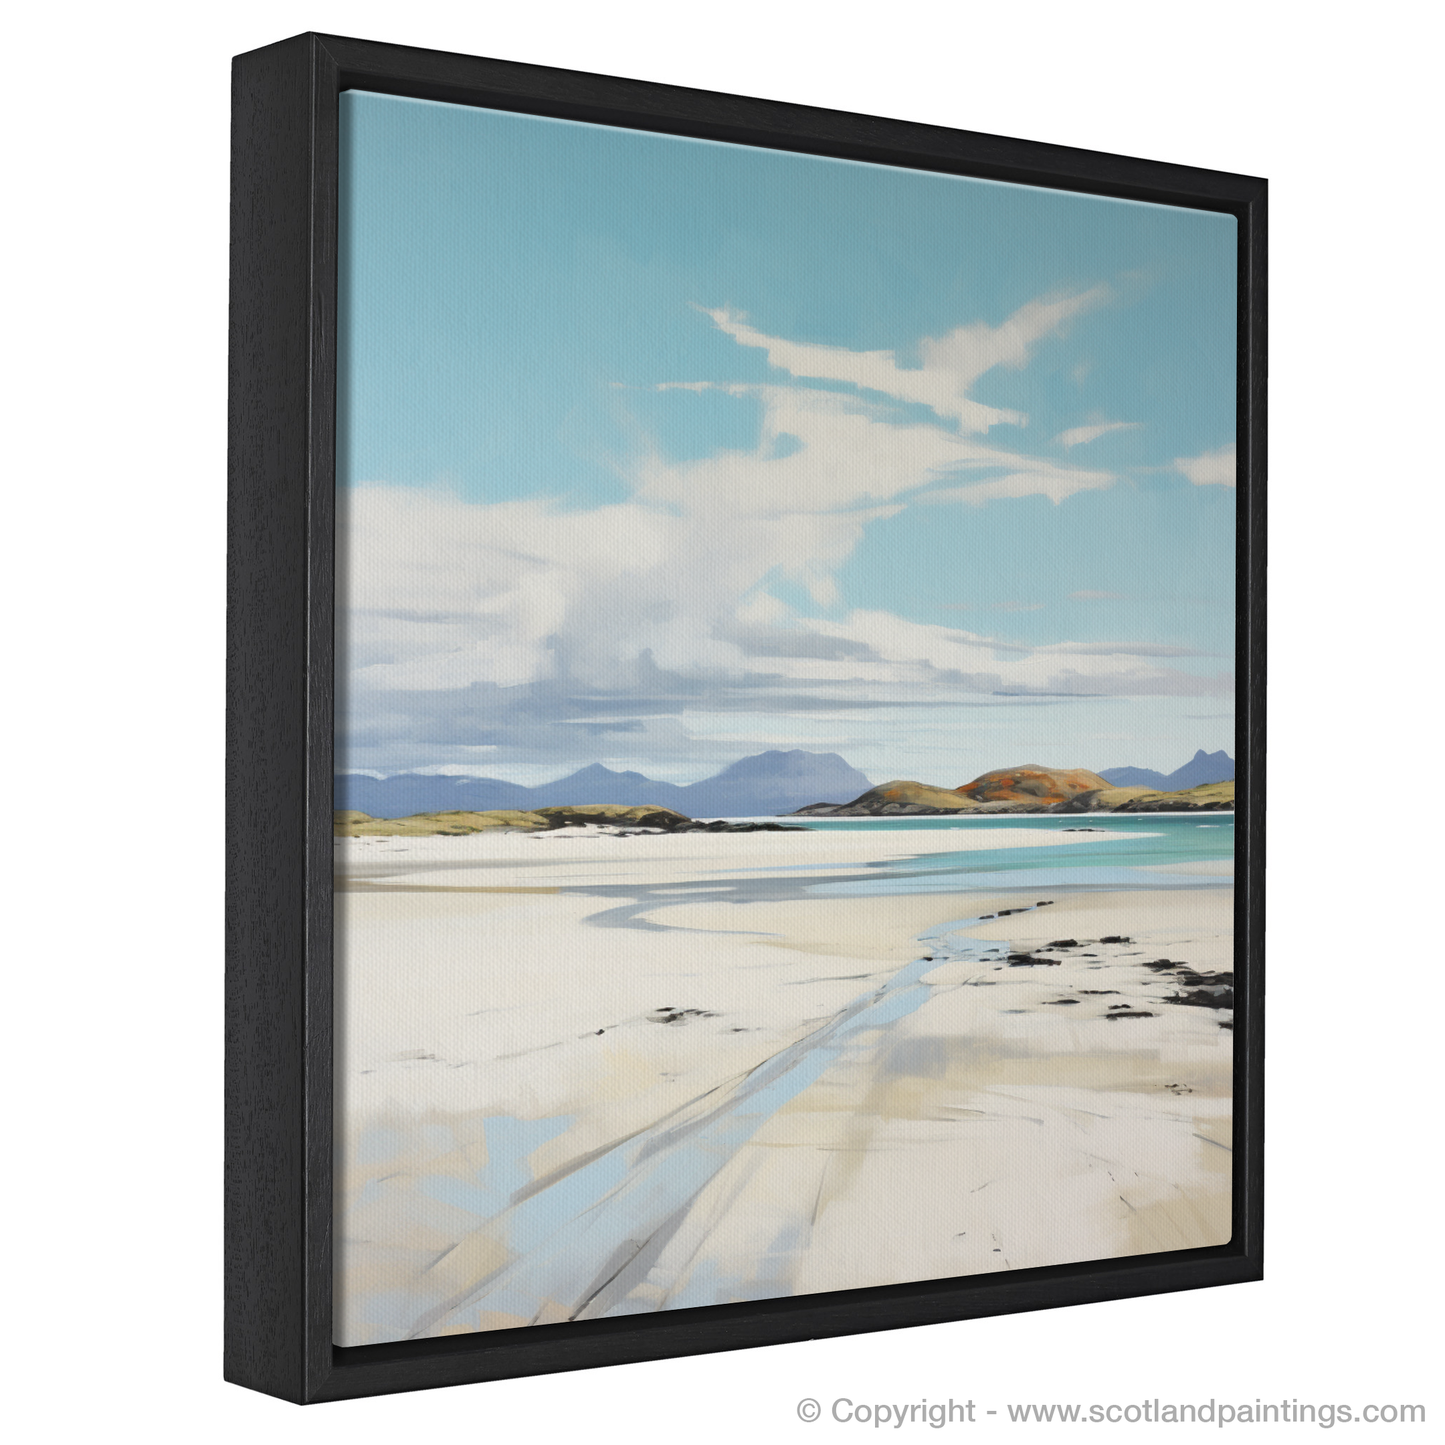 Painting and Art Print of Camusdarach Beach, Arisaig entitled "Serenity on Camusdarach Sands: A Minimalist Ode to the Scottish Coast".